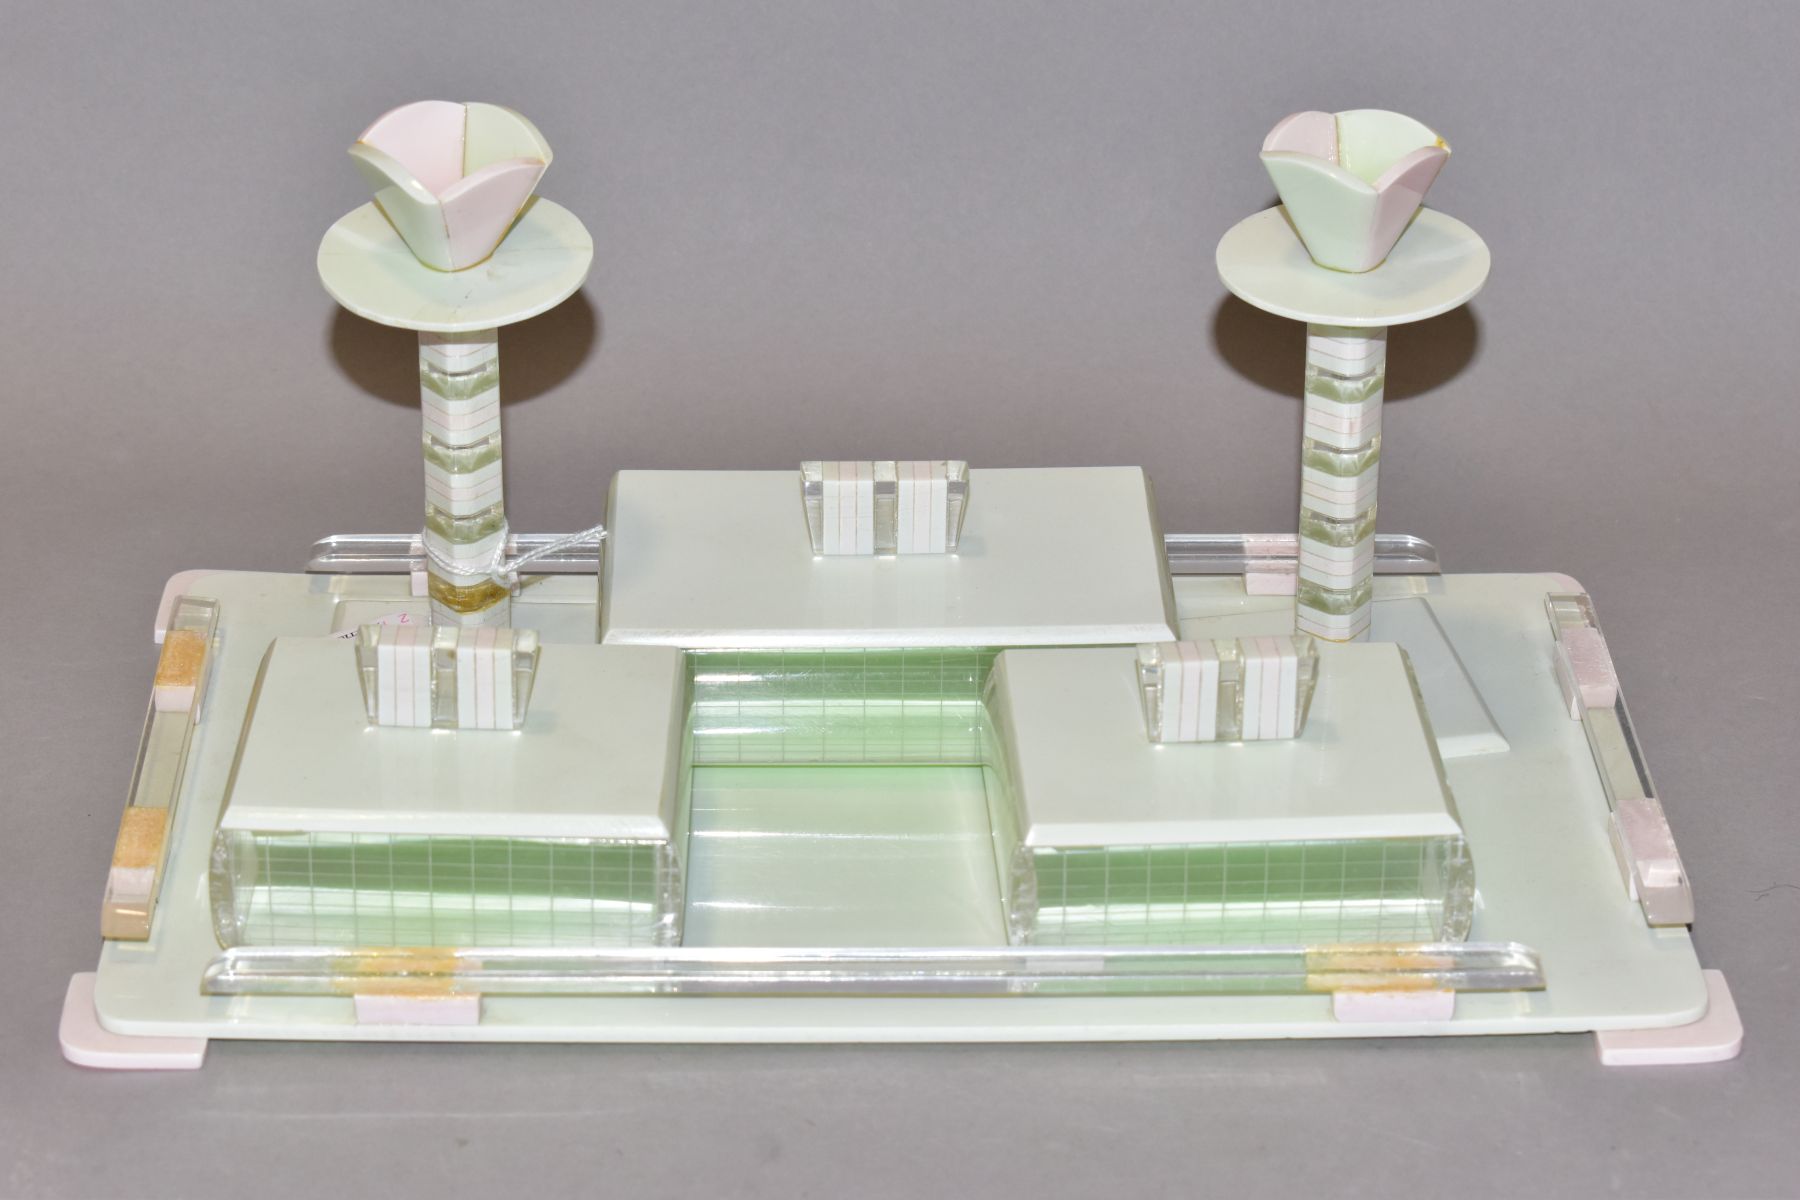 AN ART DECO PINK, GREEN AND CLEAR PLASTIC DRESSING TABLE SET, comprising rectangular tray, a pair of